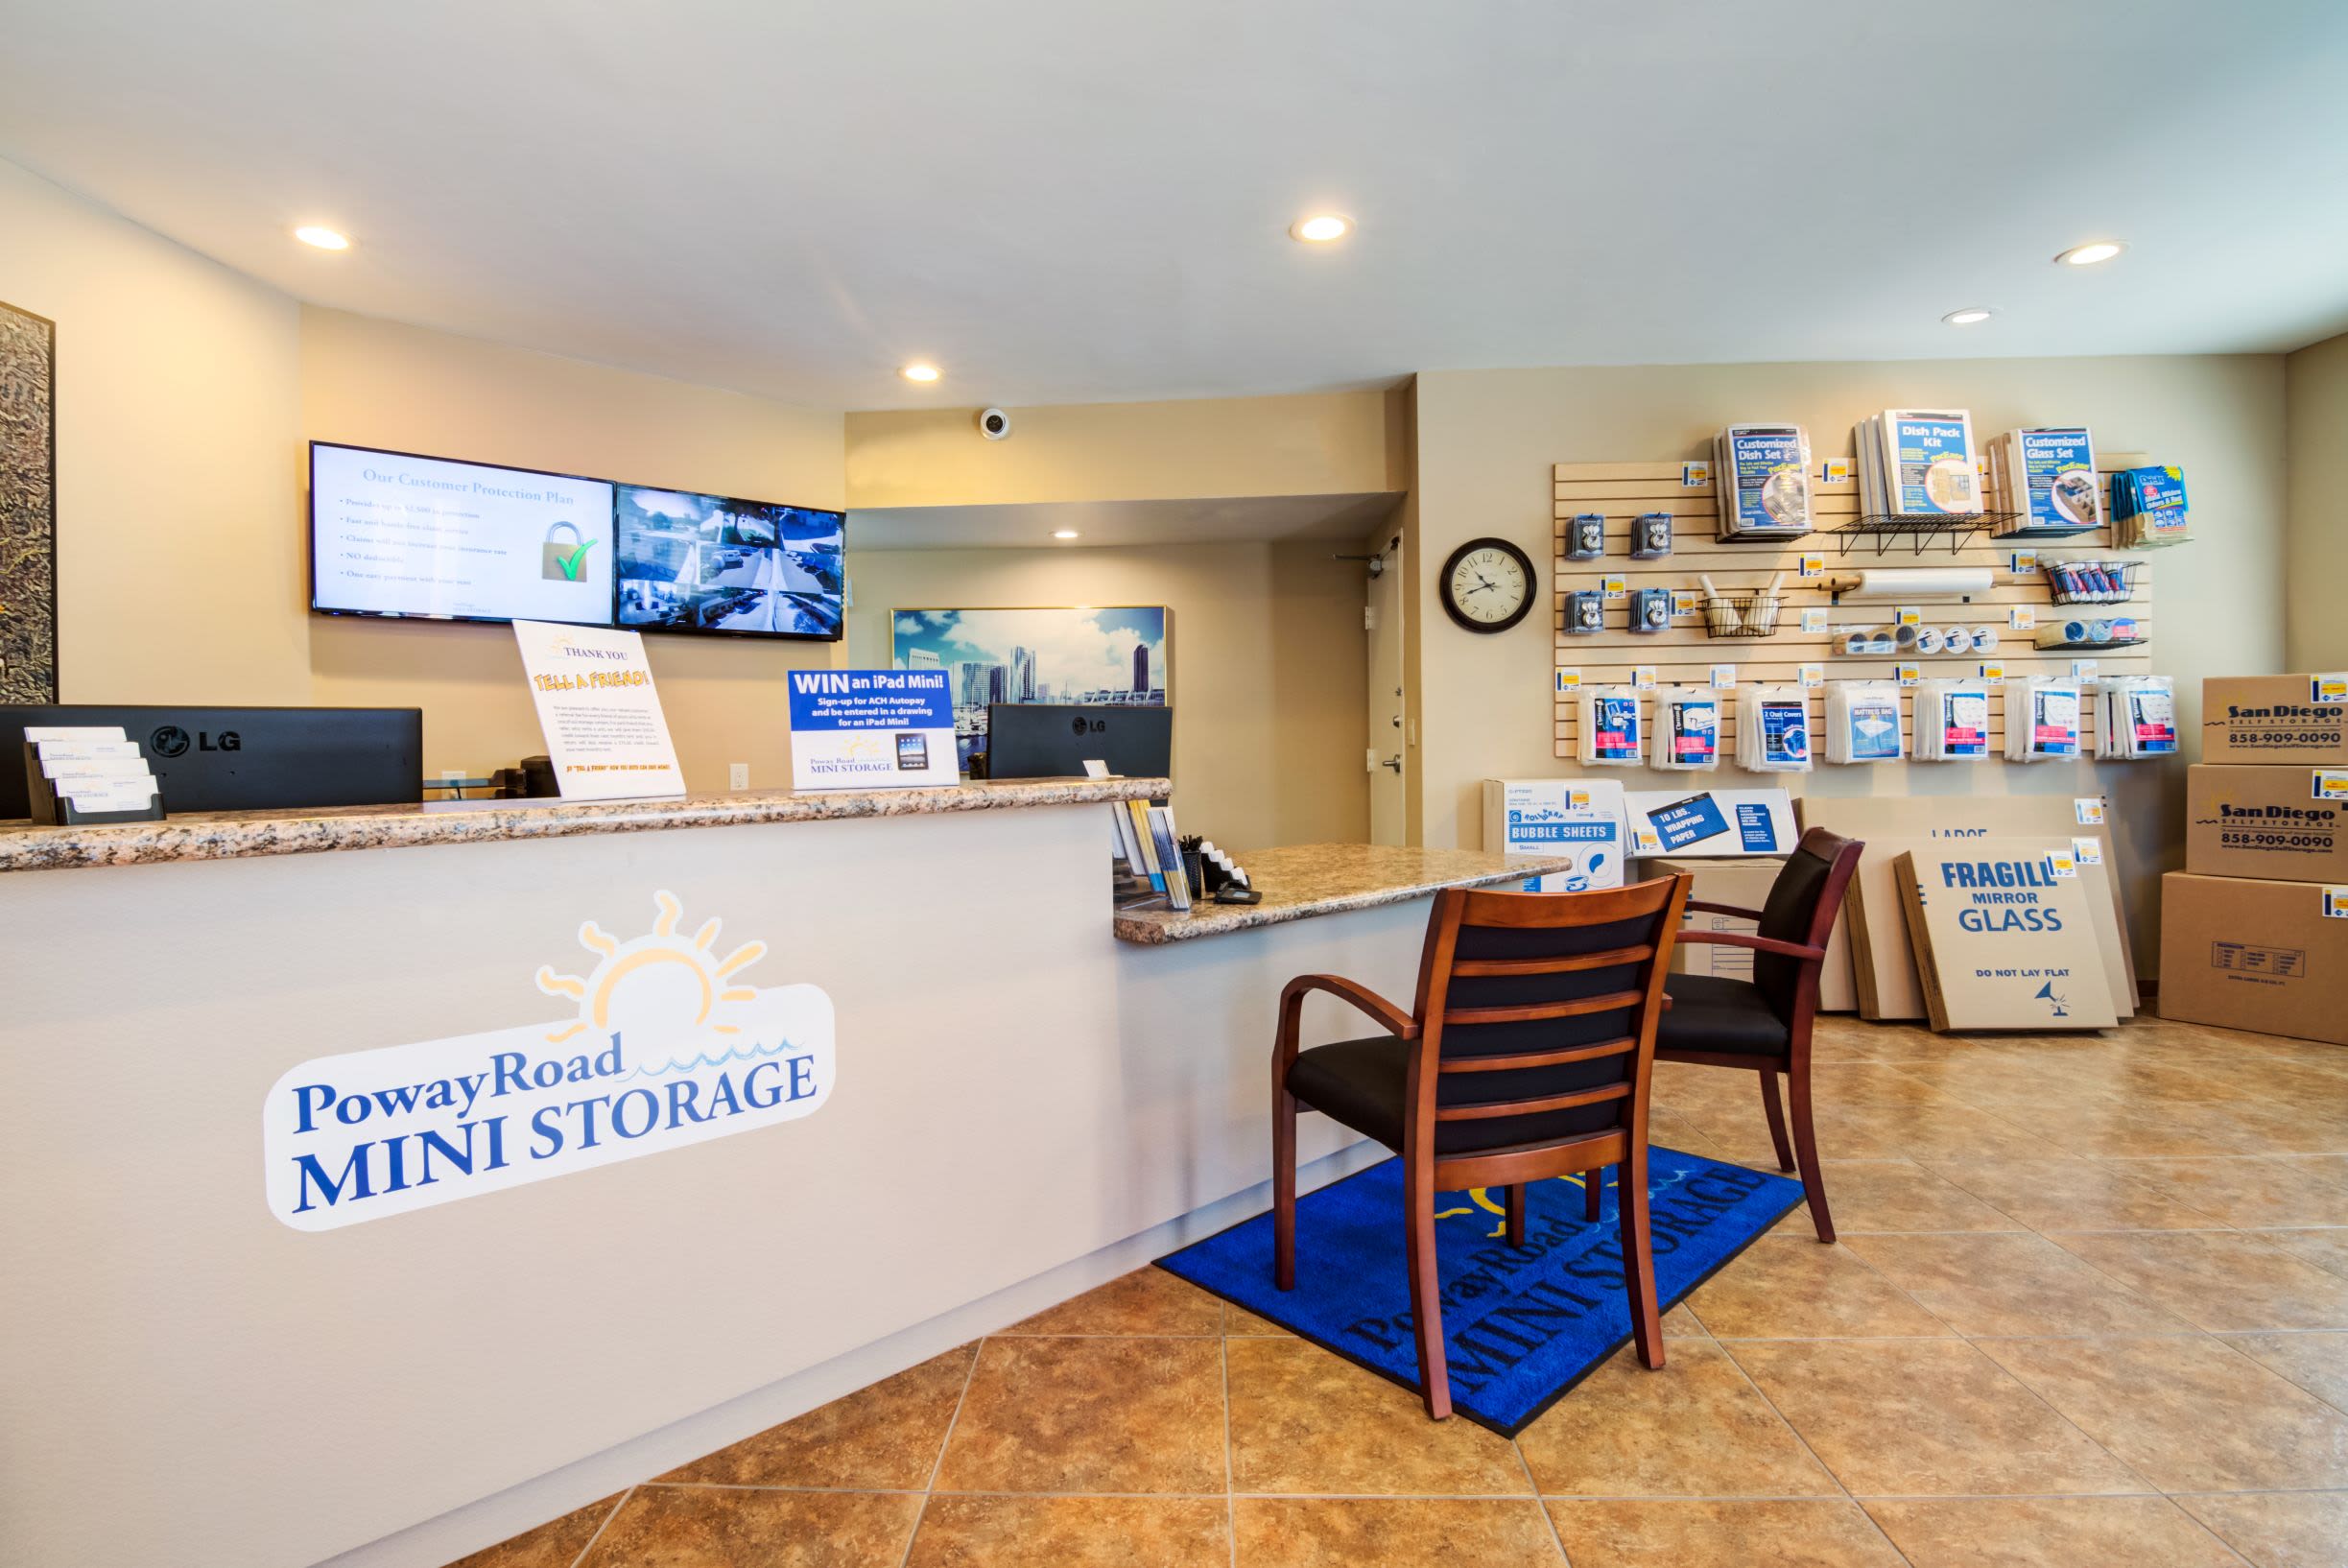 The front desk at Poway Road Mini Storage in Poway, CA